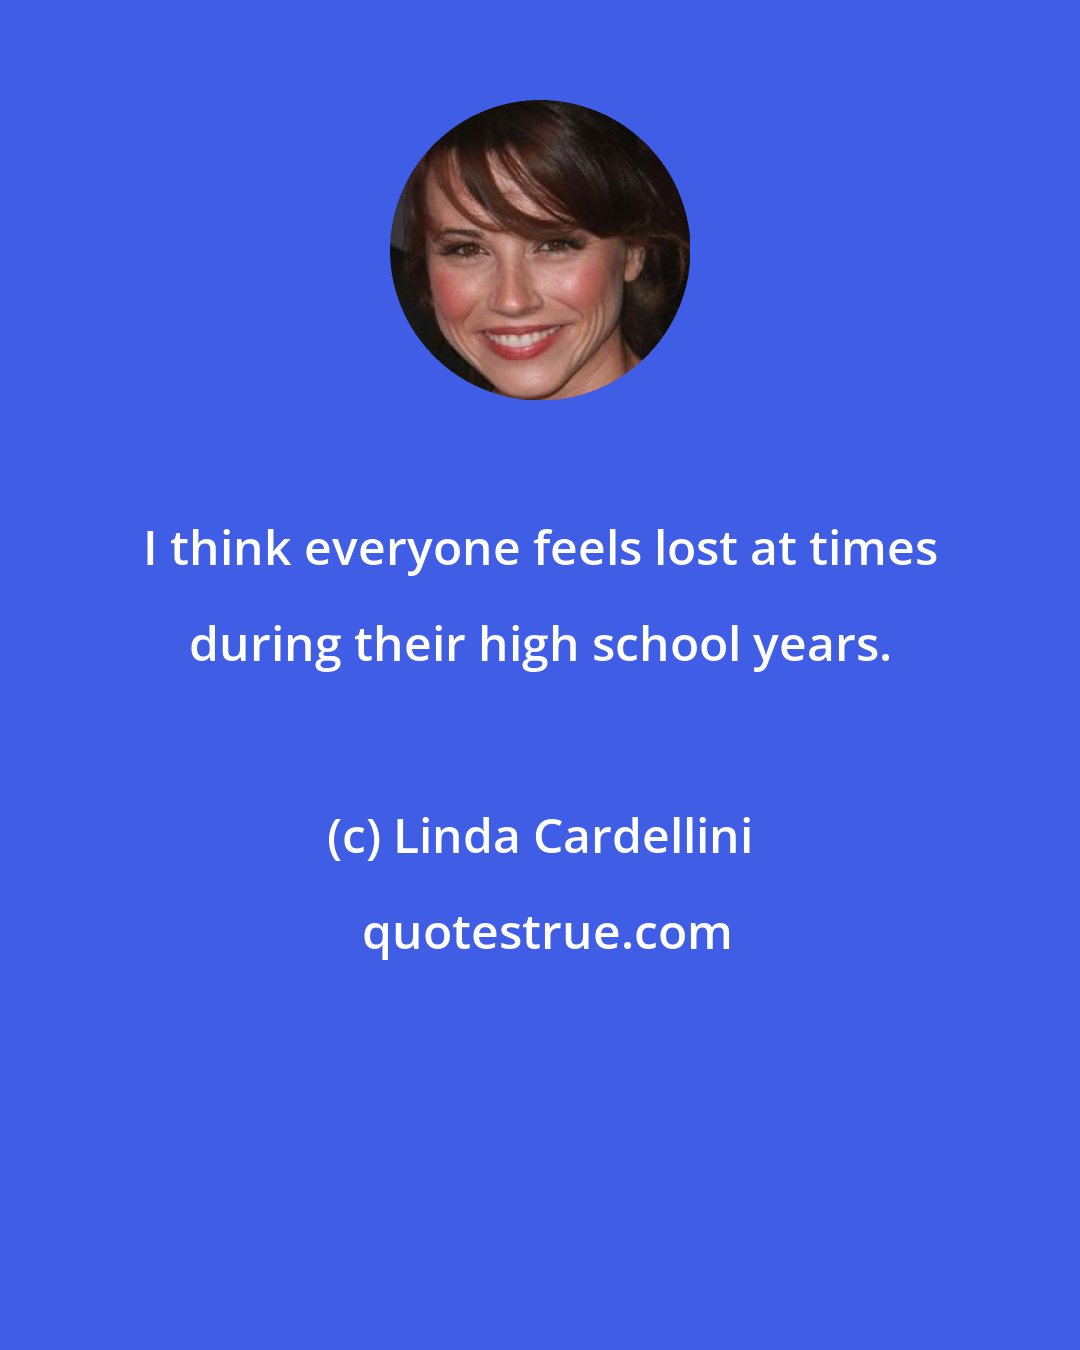 Linda Cardellini: I think everyone feels lost at times during their high school years.